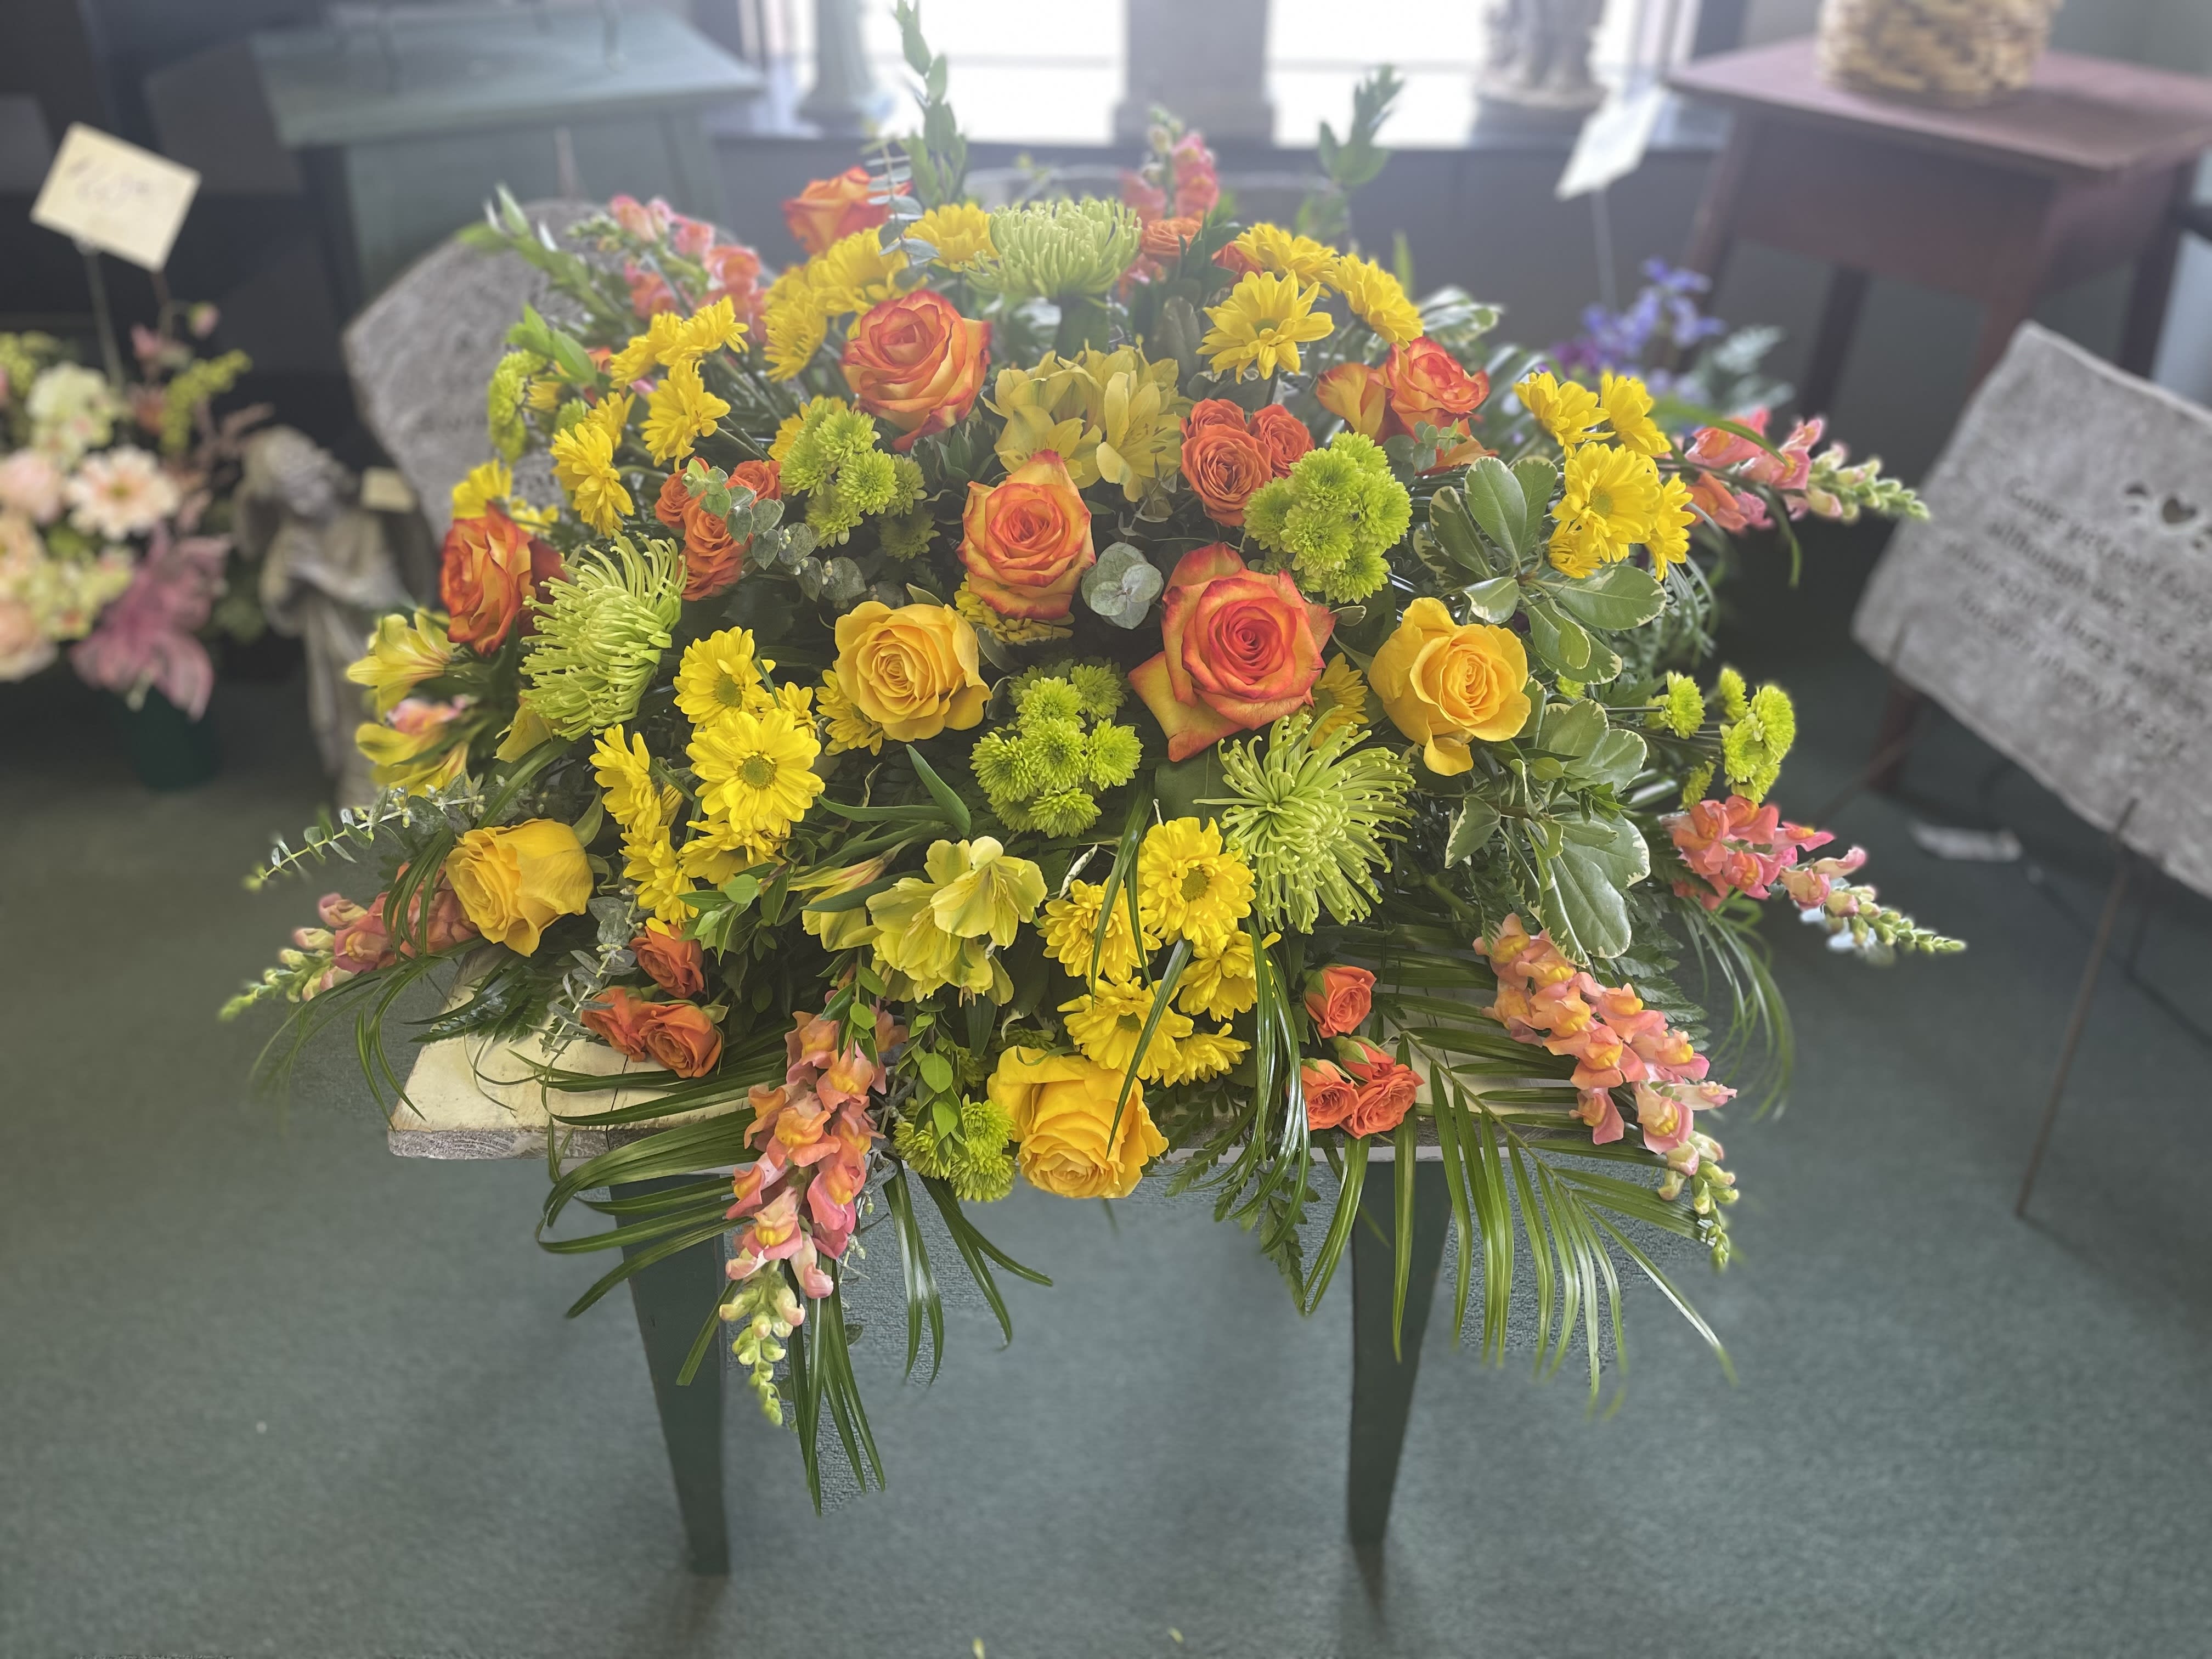 Loving Legacy Casket Spray - Beautiful mix of roses, pom pons, alstromerias, snapdragons, daisies, and spray roses designed for the top of the casket. This design shows yellows, oranges, and green flowers, but can be designed in any color combination!